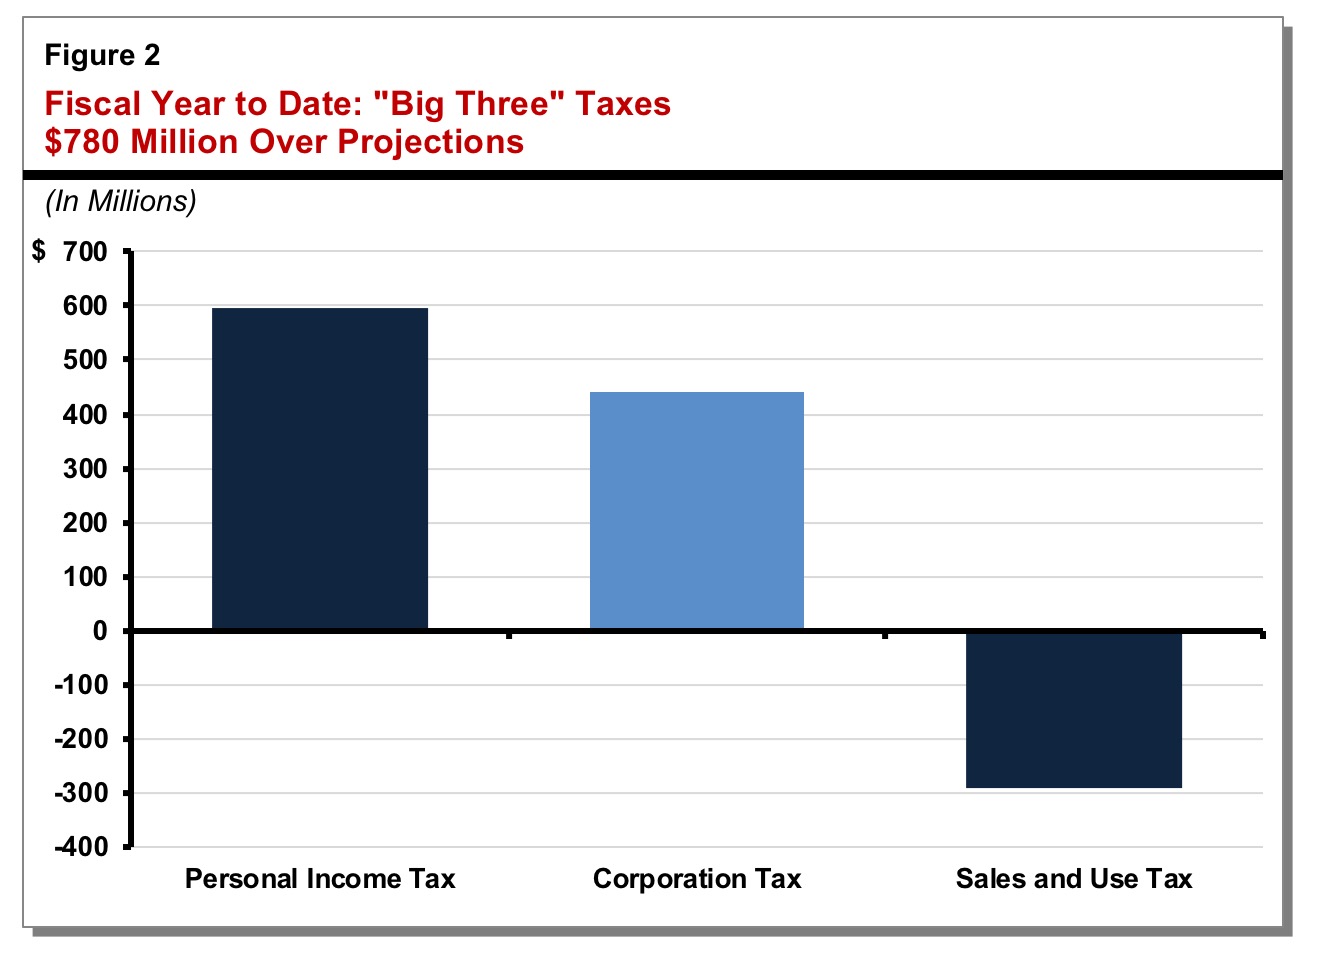 Figure shows  that for fiscal year to date, combined income and sales taxes are $780 million above projections.